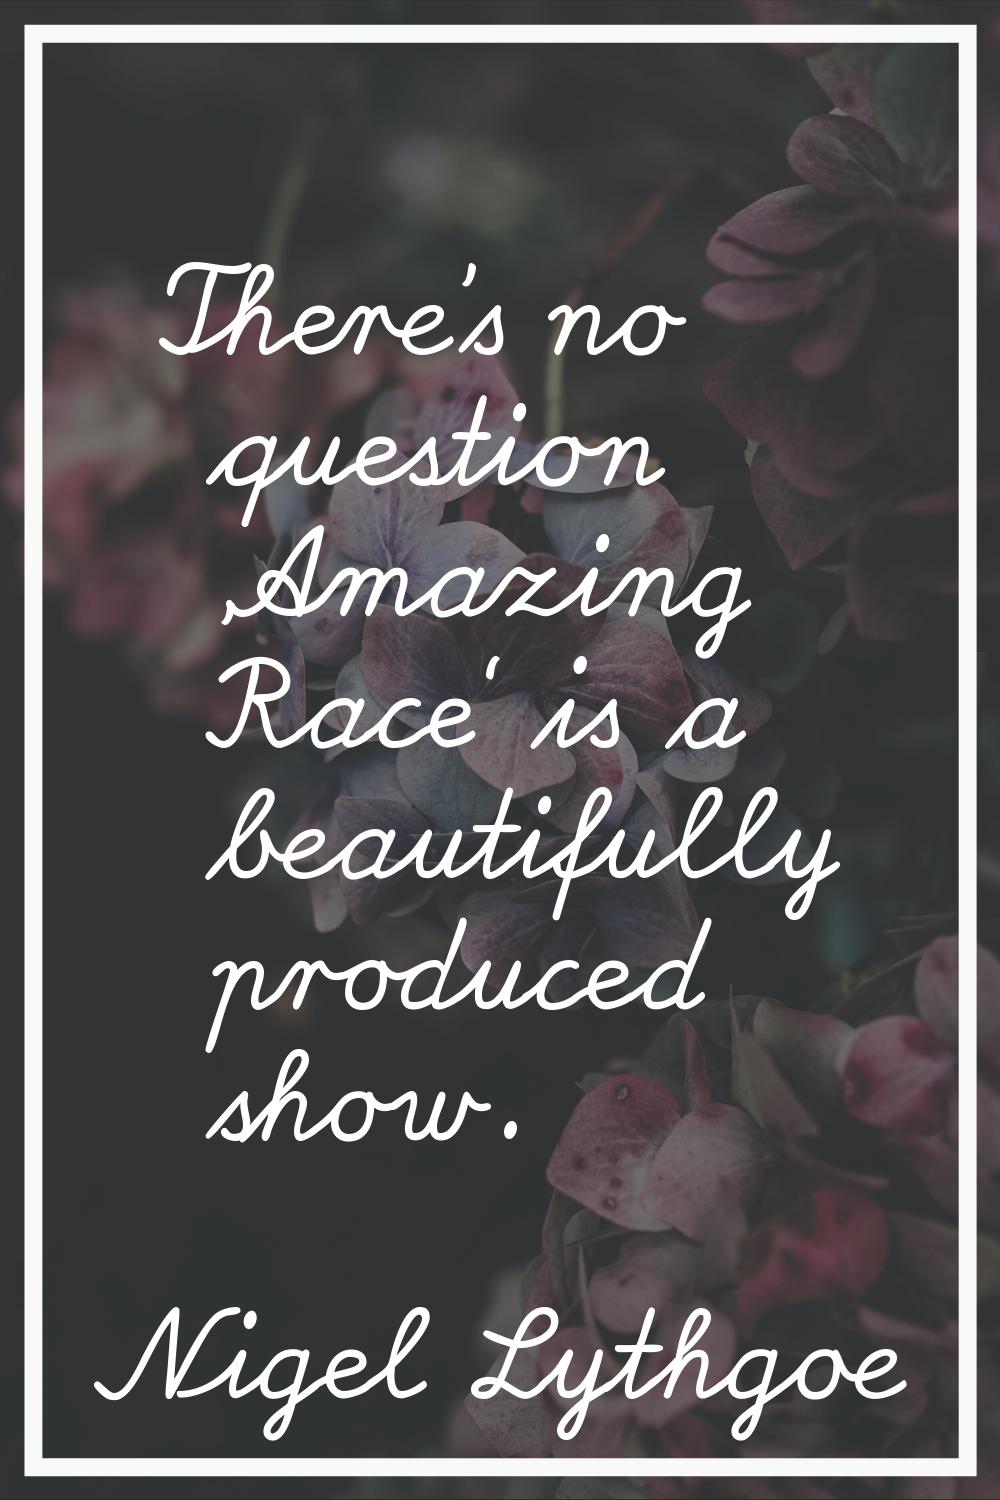 There's no question 'Amazing Race' is a beautifully produced show.